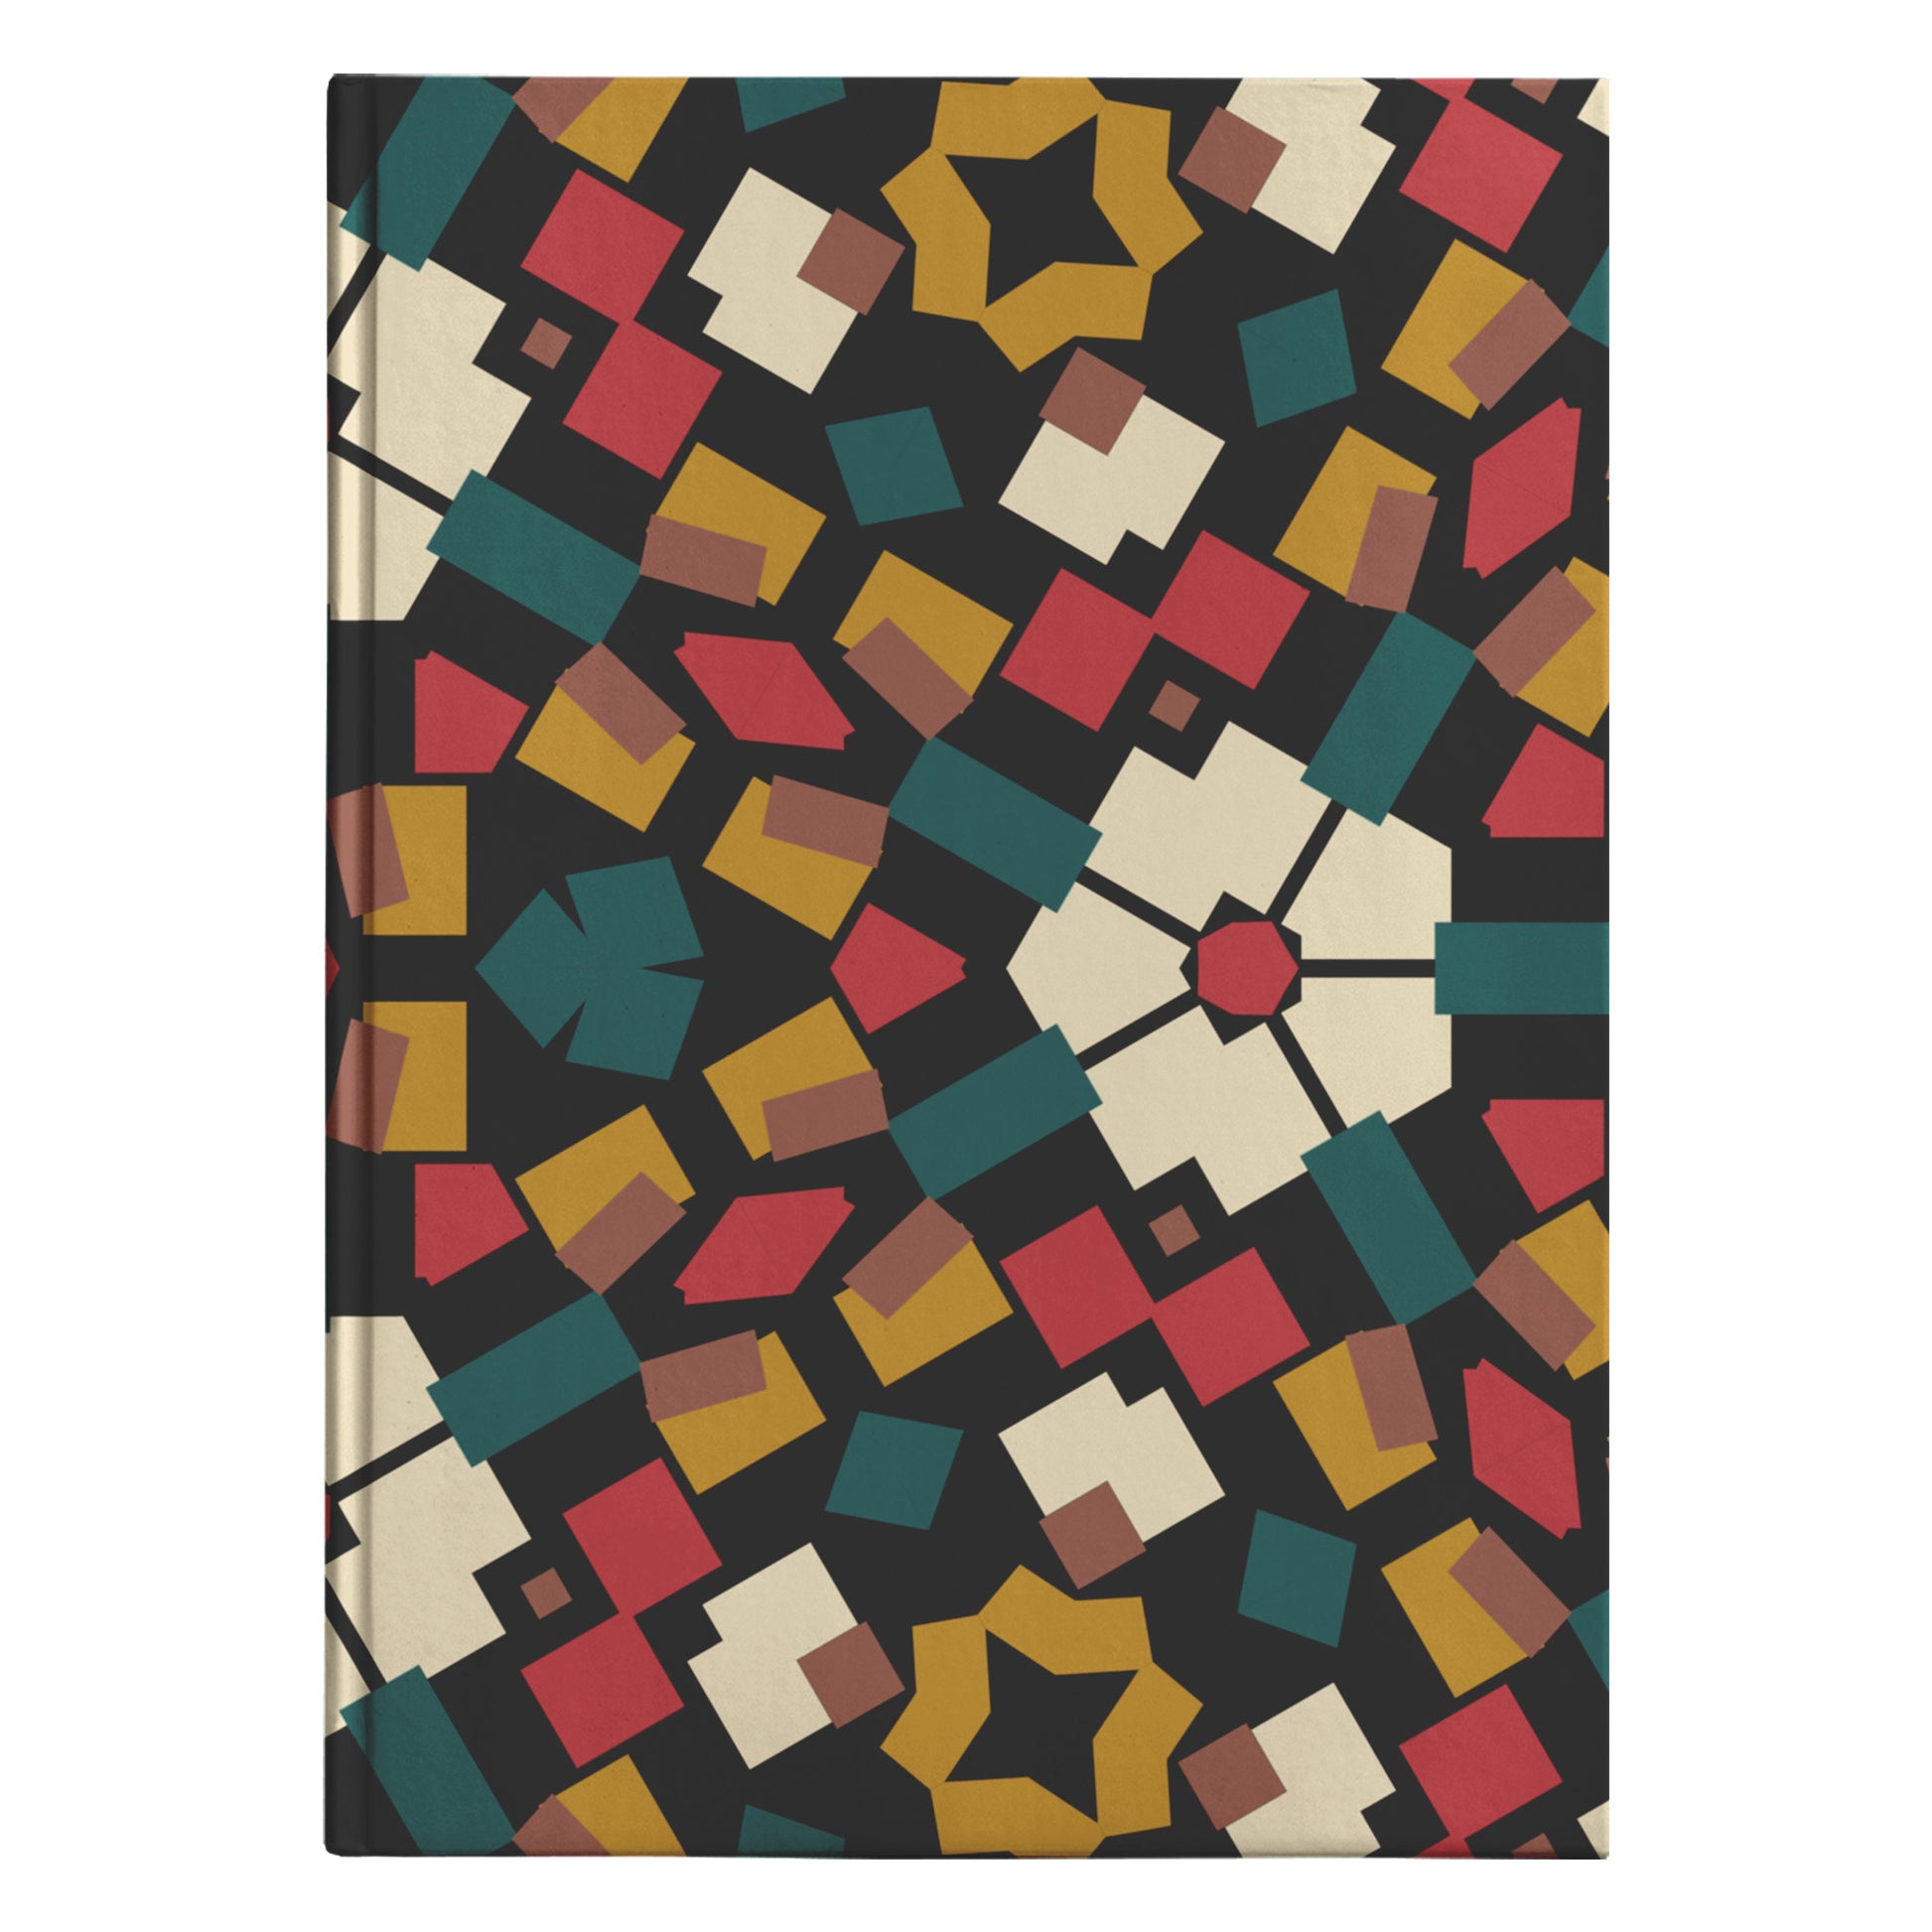 Hardcover journal with an Afro-Floral Fusion design featuring a kaleidoscopic array of geometric shapes and a central floral motif in a warm palette of red, yellow, green, and beige against a black background.